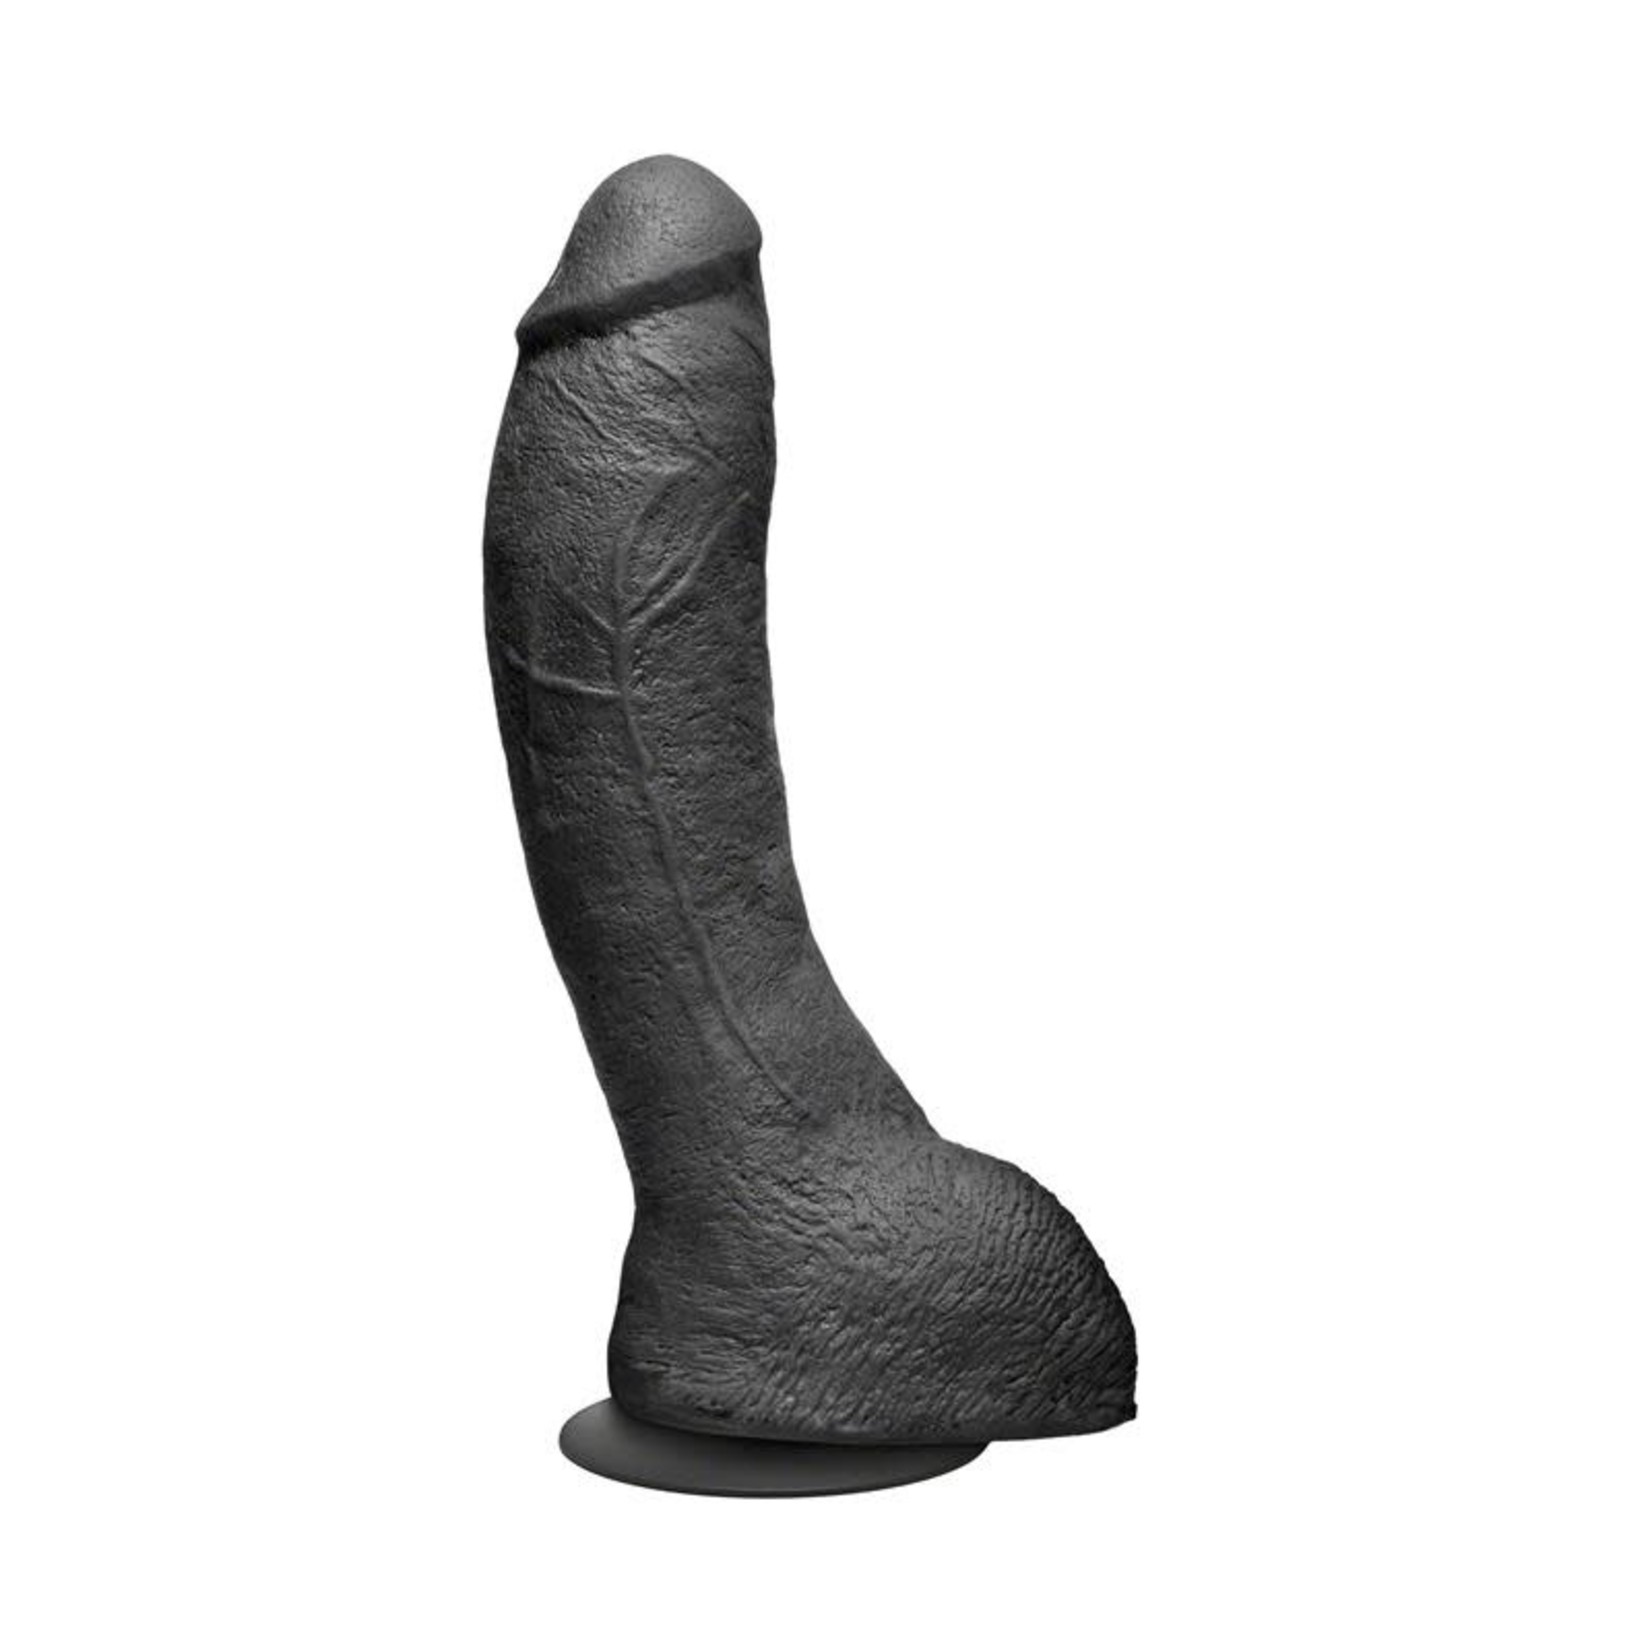 DOC JOHNSON KINK - THE PERFECT P-SPOT COCK W REMOVABLE VAC-U-LOCK SUCTION CUP - BLACK